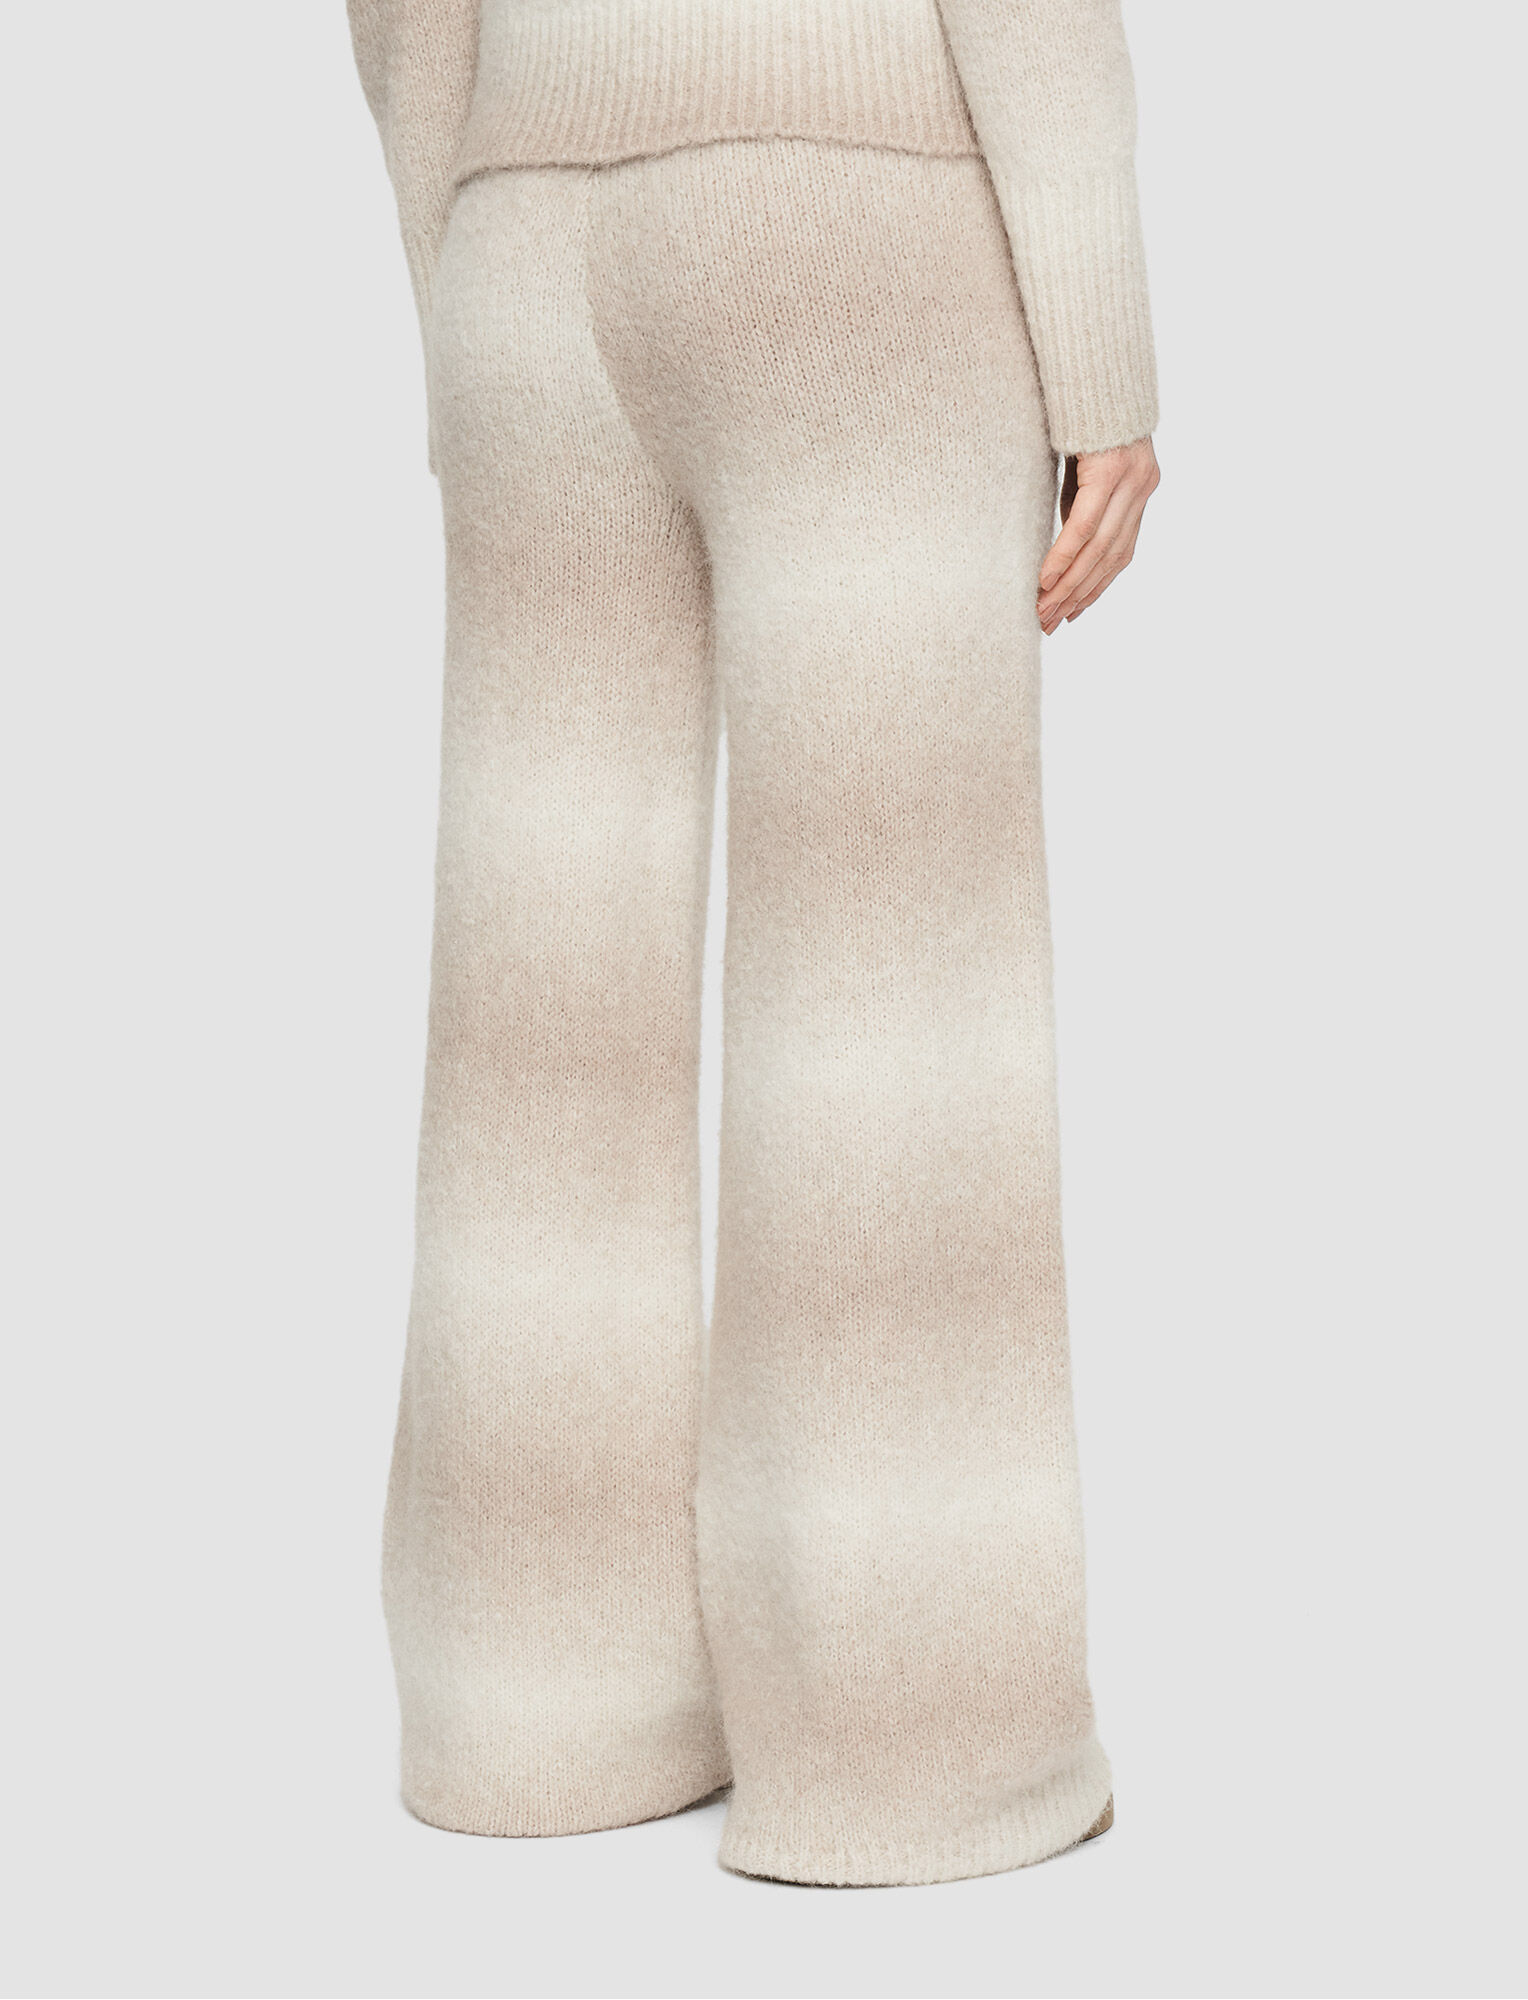 Joseph, Printed Knit Trousers, in Ivory